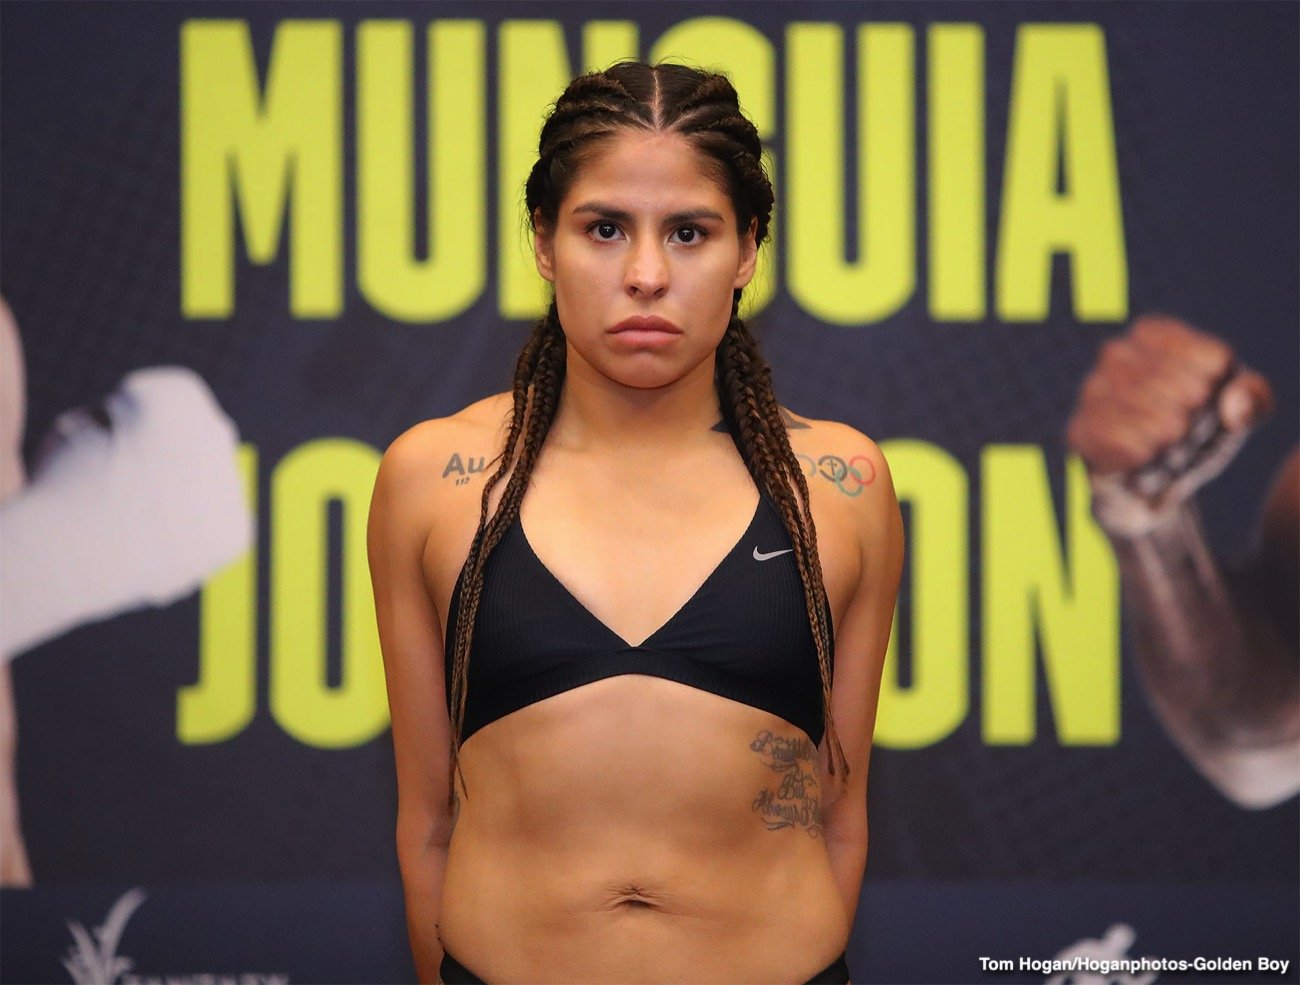 Image: Live Stream: Munguia vs. Johnson DAZN Weigh In Results